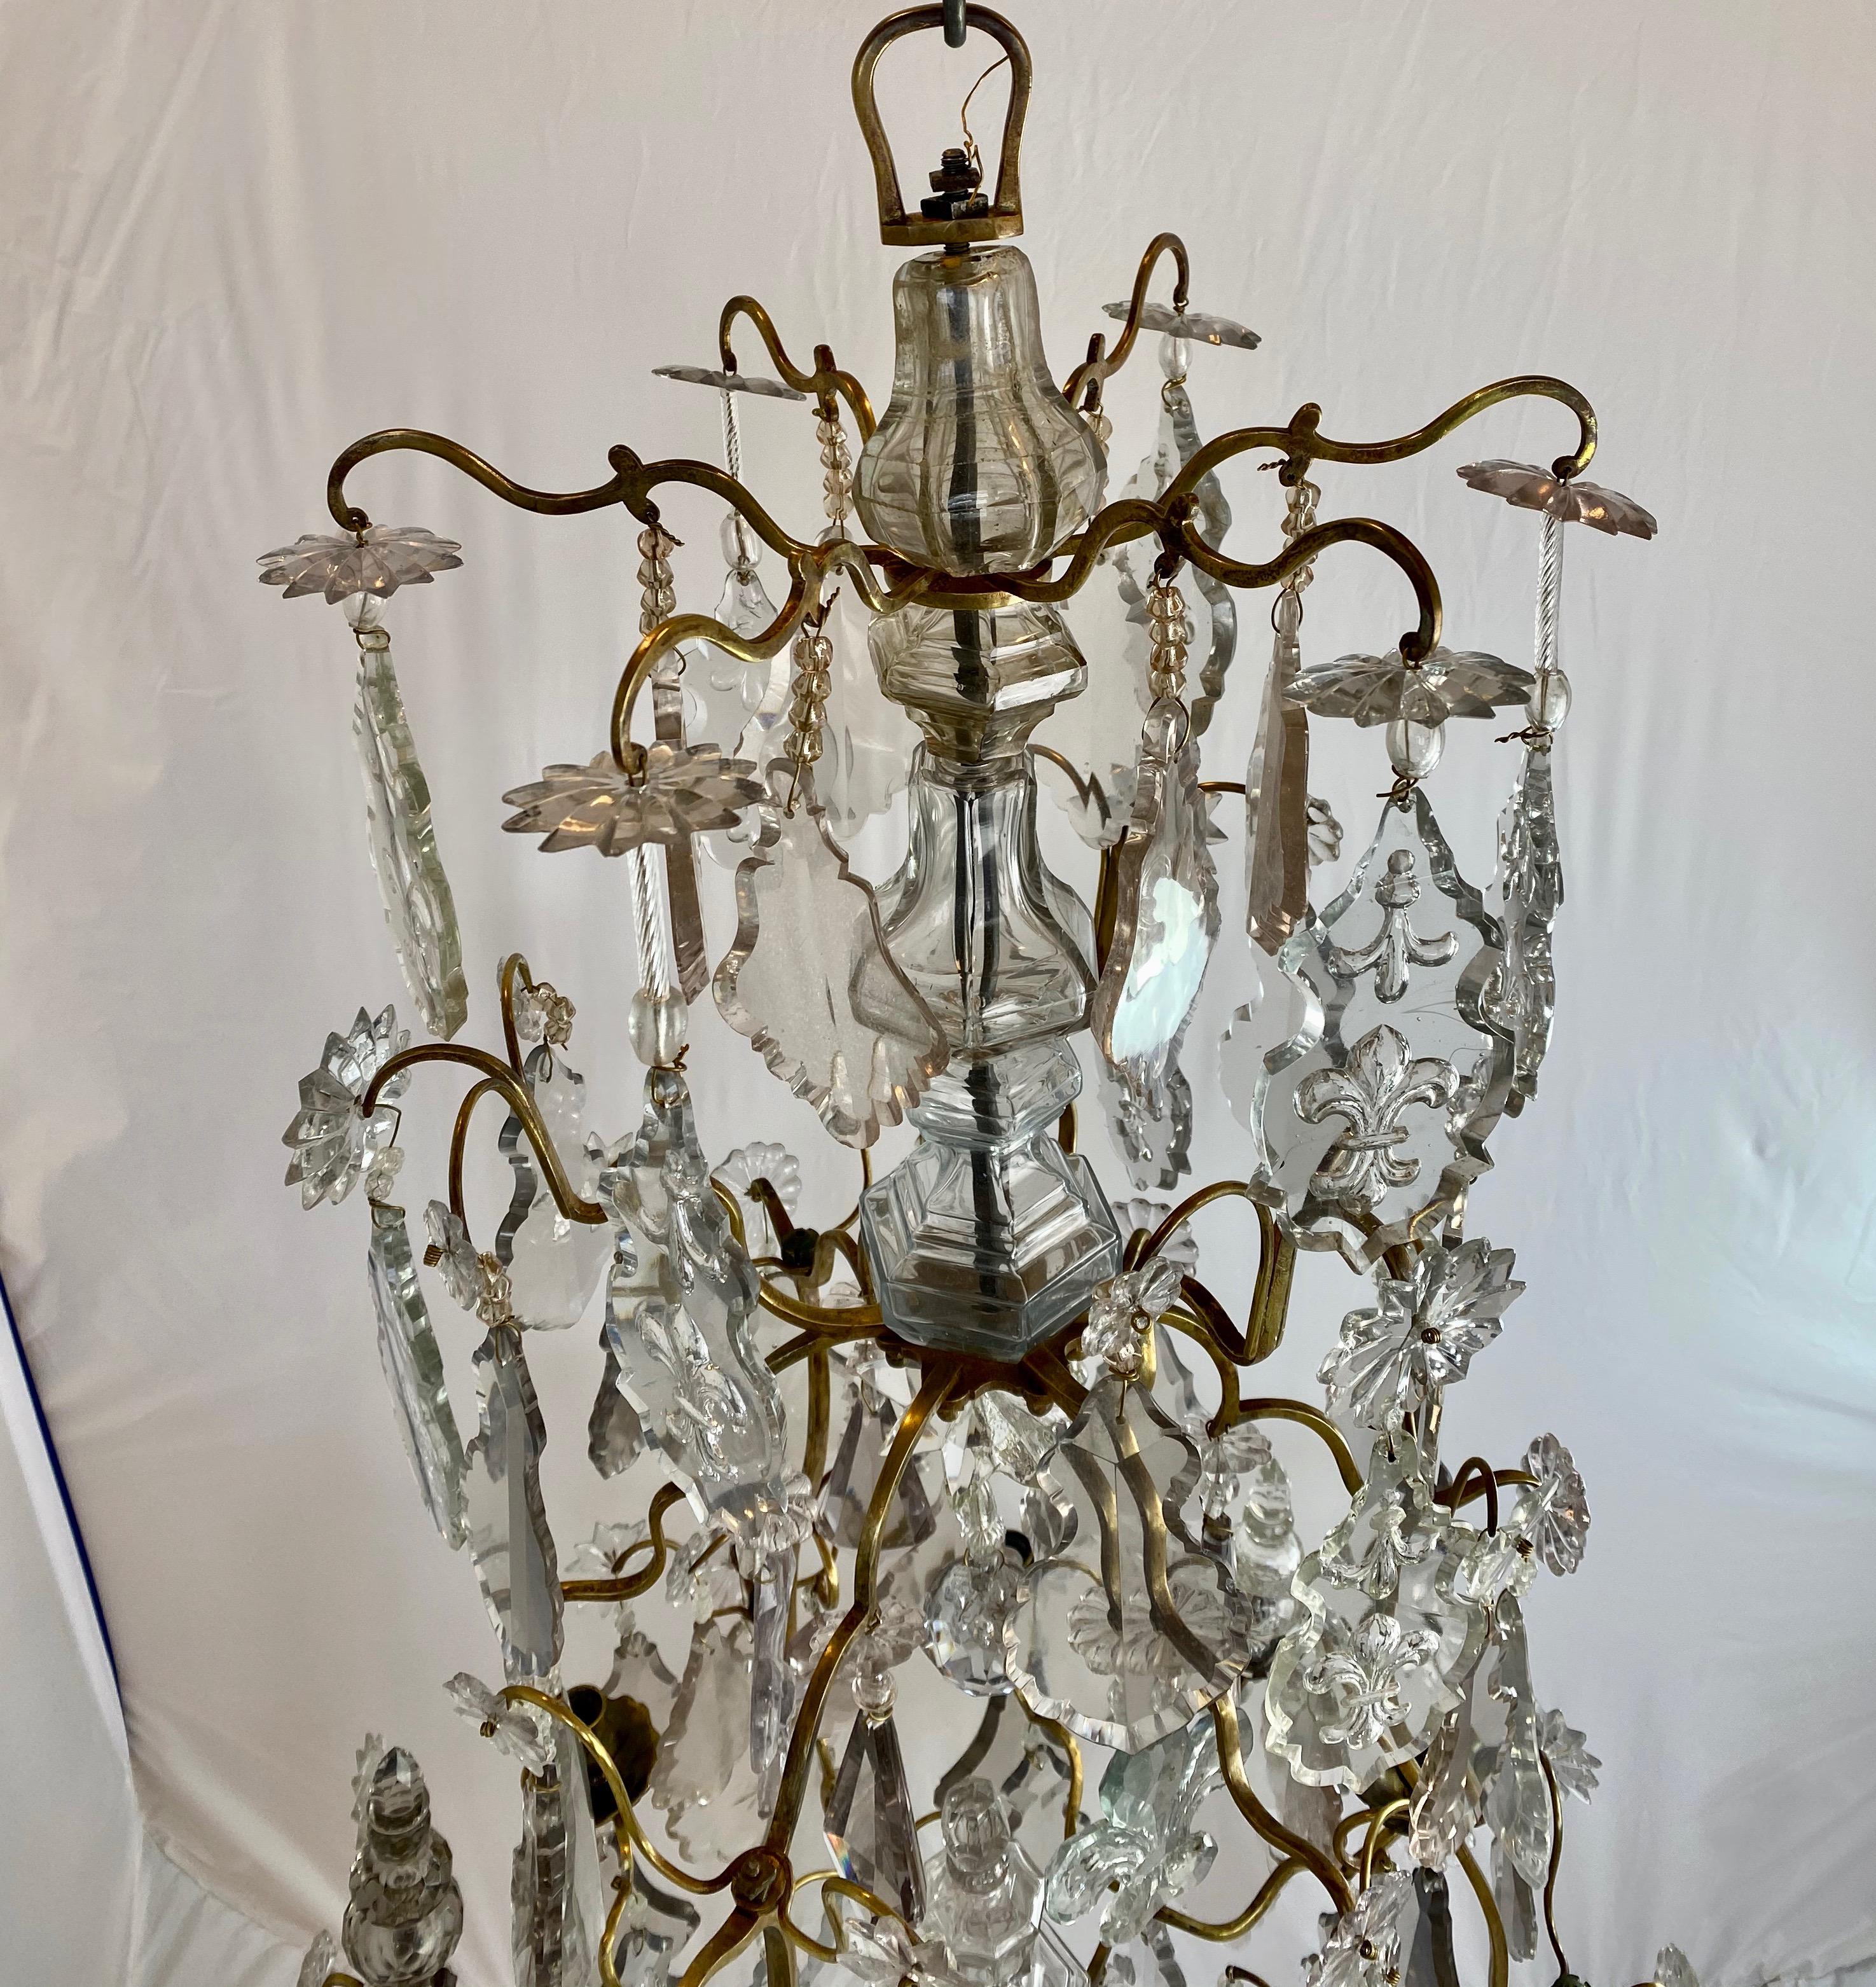 A quite large French Baroque chandelier from the 18th c. The chandelier has a cage frame of brass/bronze with a number of leaf-shaped pendants hanging. Centrally in the chandelier is a standing obelisk that is blown. At the bottom the chandeliers